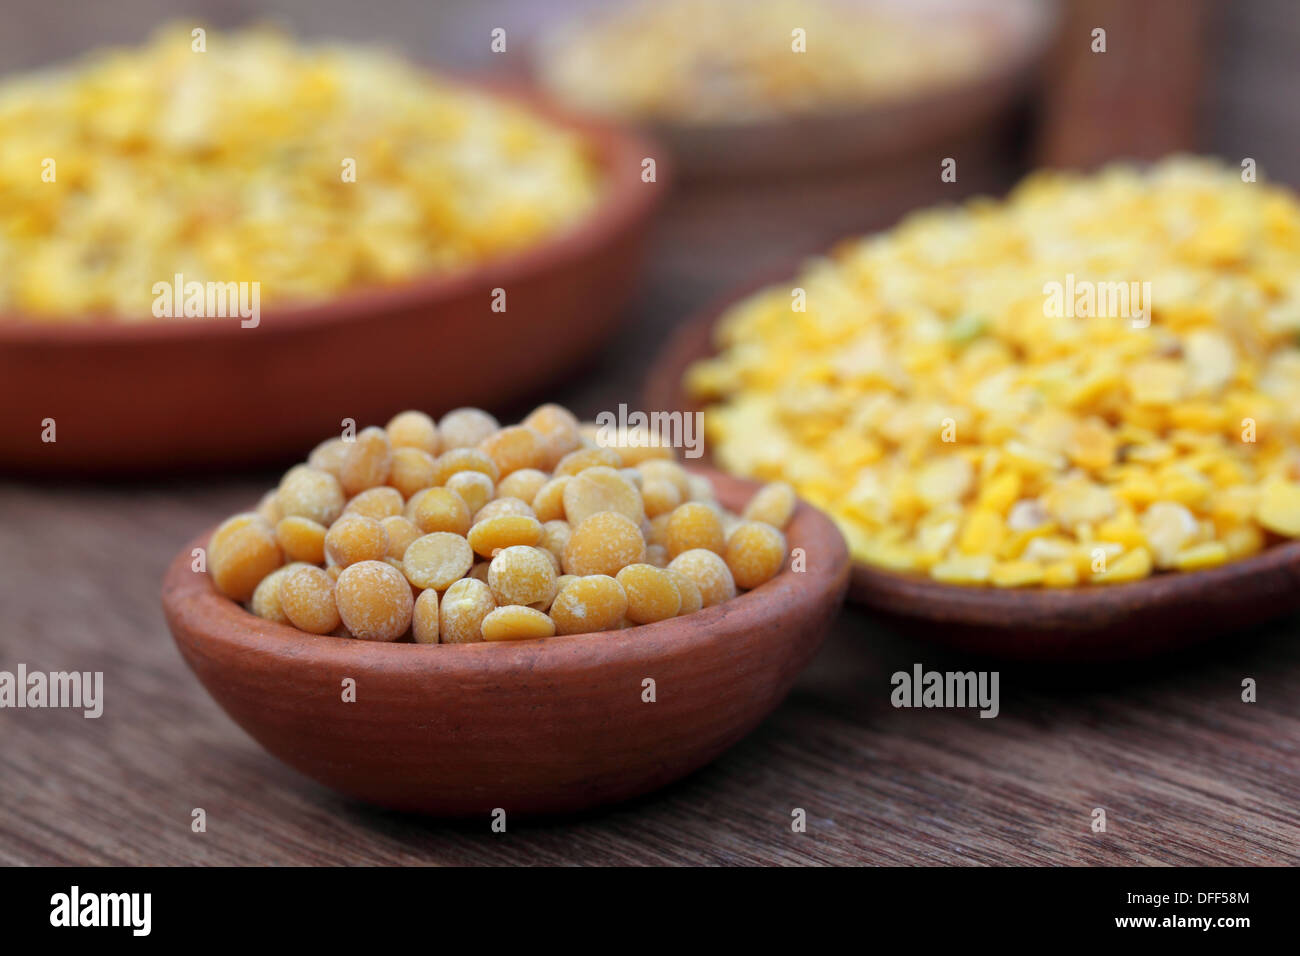 Pigeon pea with other pulses Stock Photo